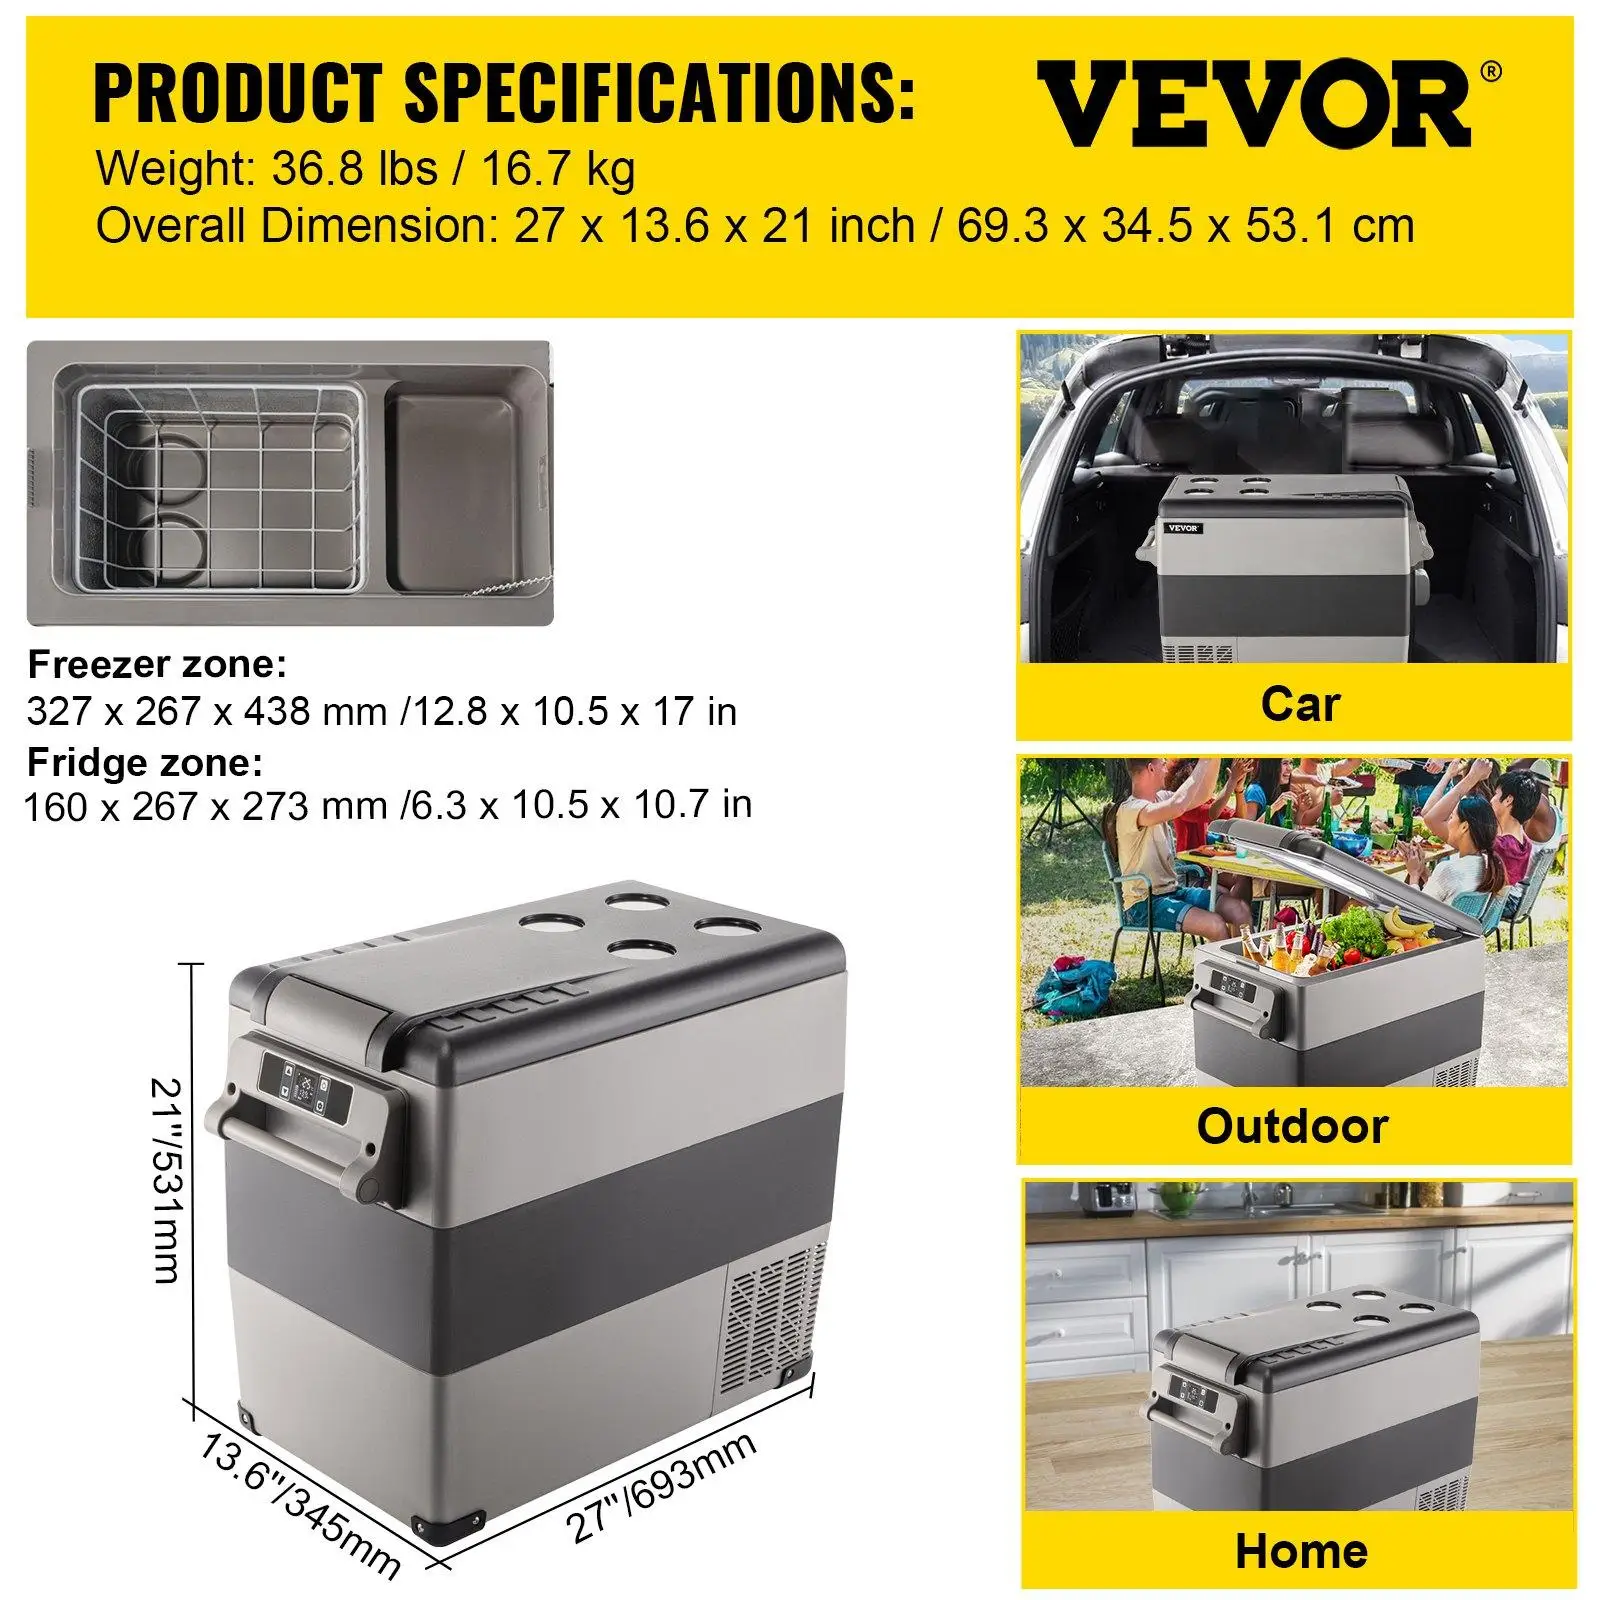 Car freezer product specifications